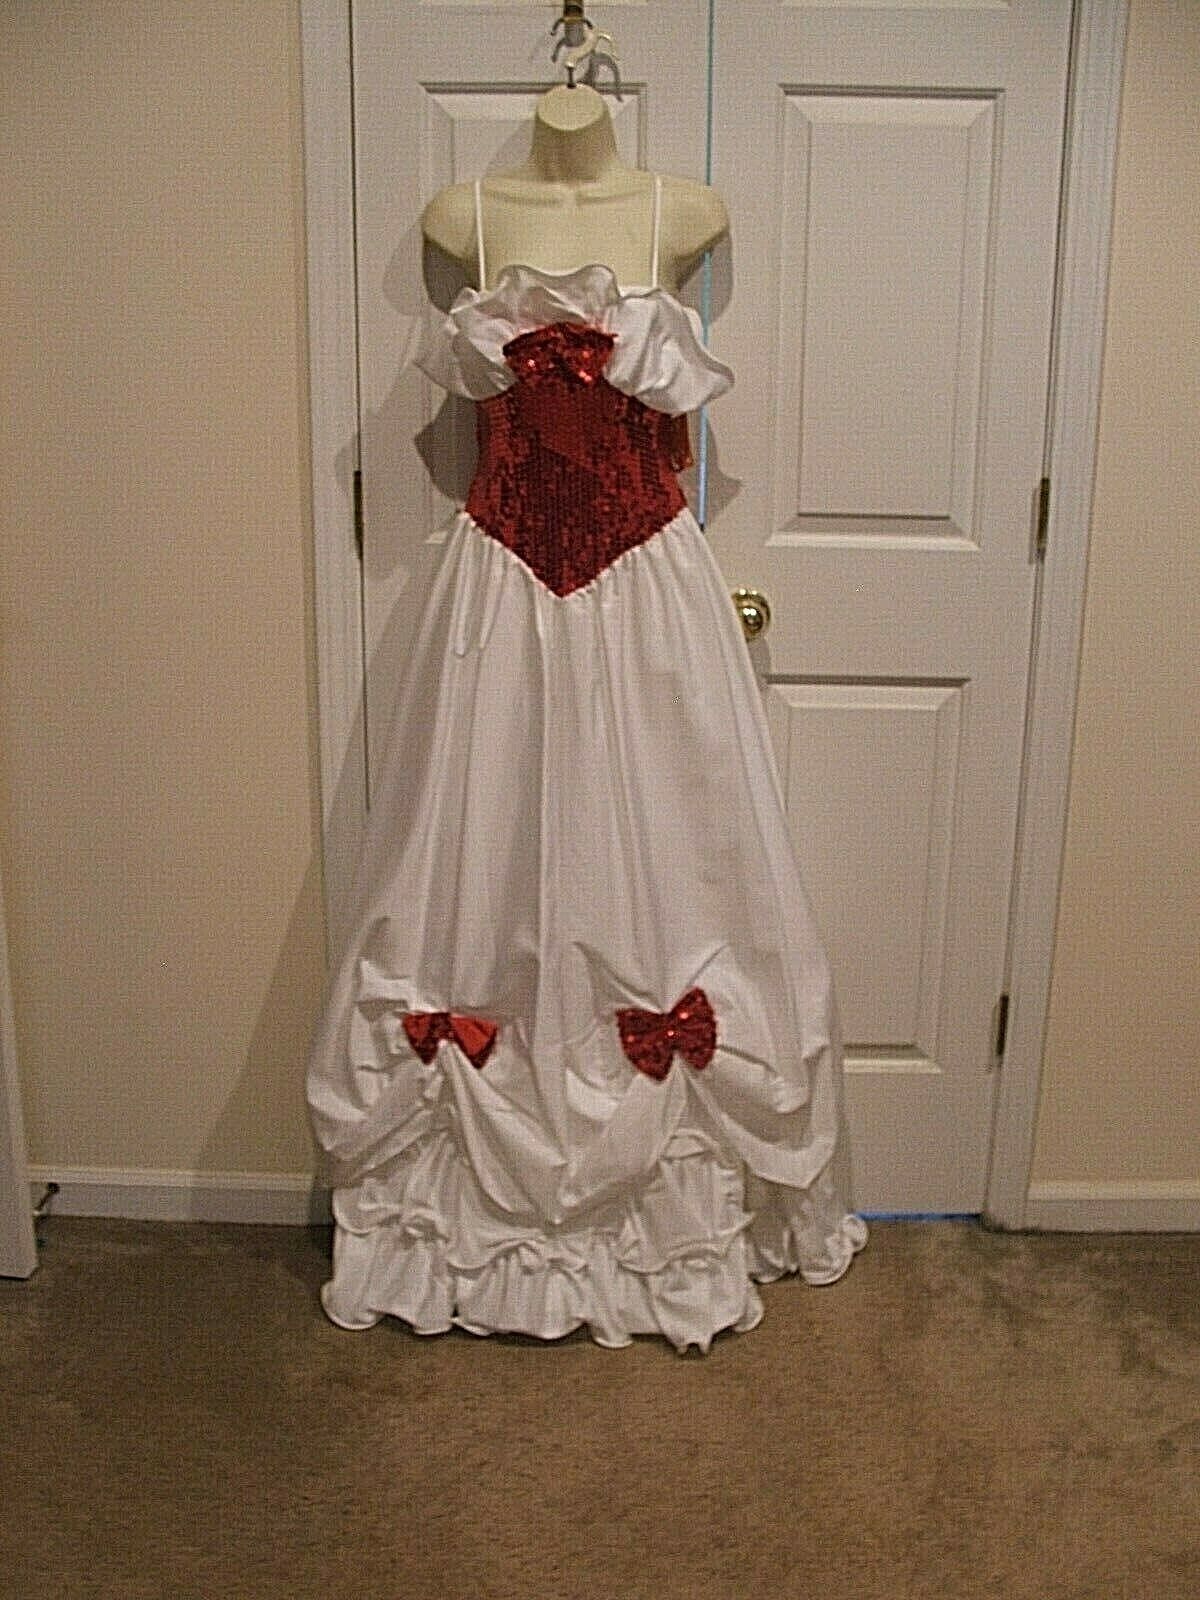 Primary image for NWT $230 Vintage 80s COSTUME HALLOWEEN  Ball Gown Bridesmaid Prom  siz 5